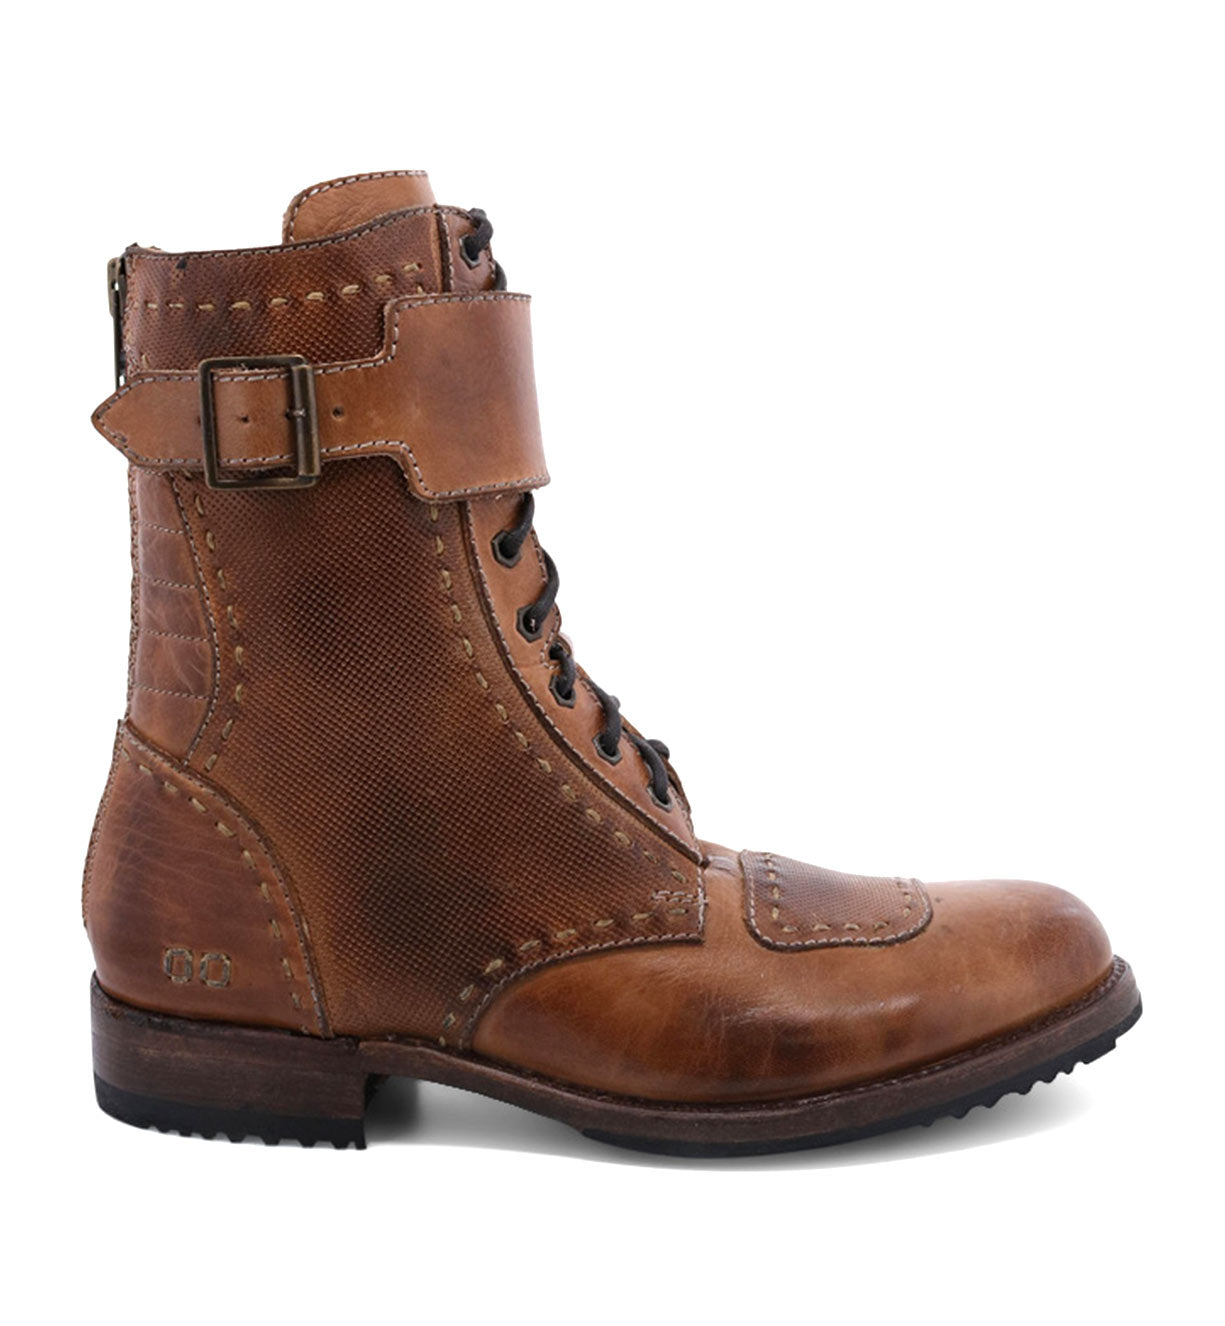 Side view of a single brown Bed Stu Walker lace-up boot with a buckled strap, isolated on a white background.